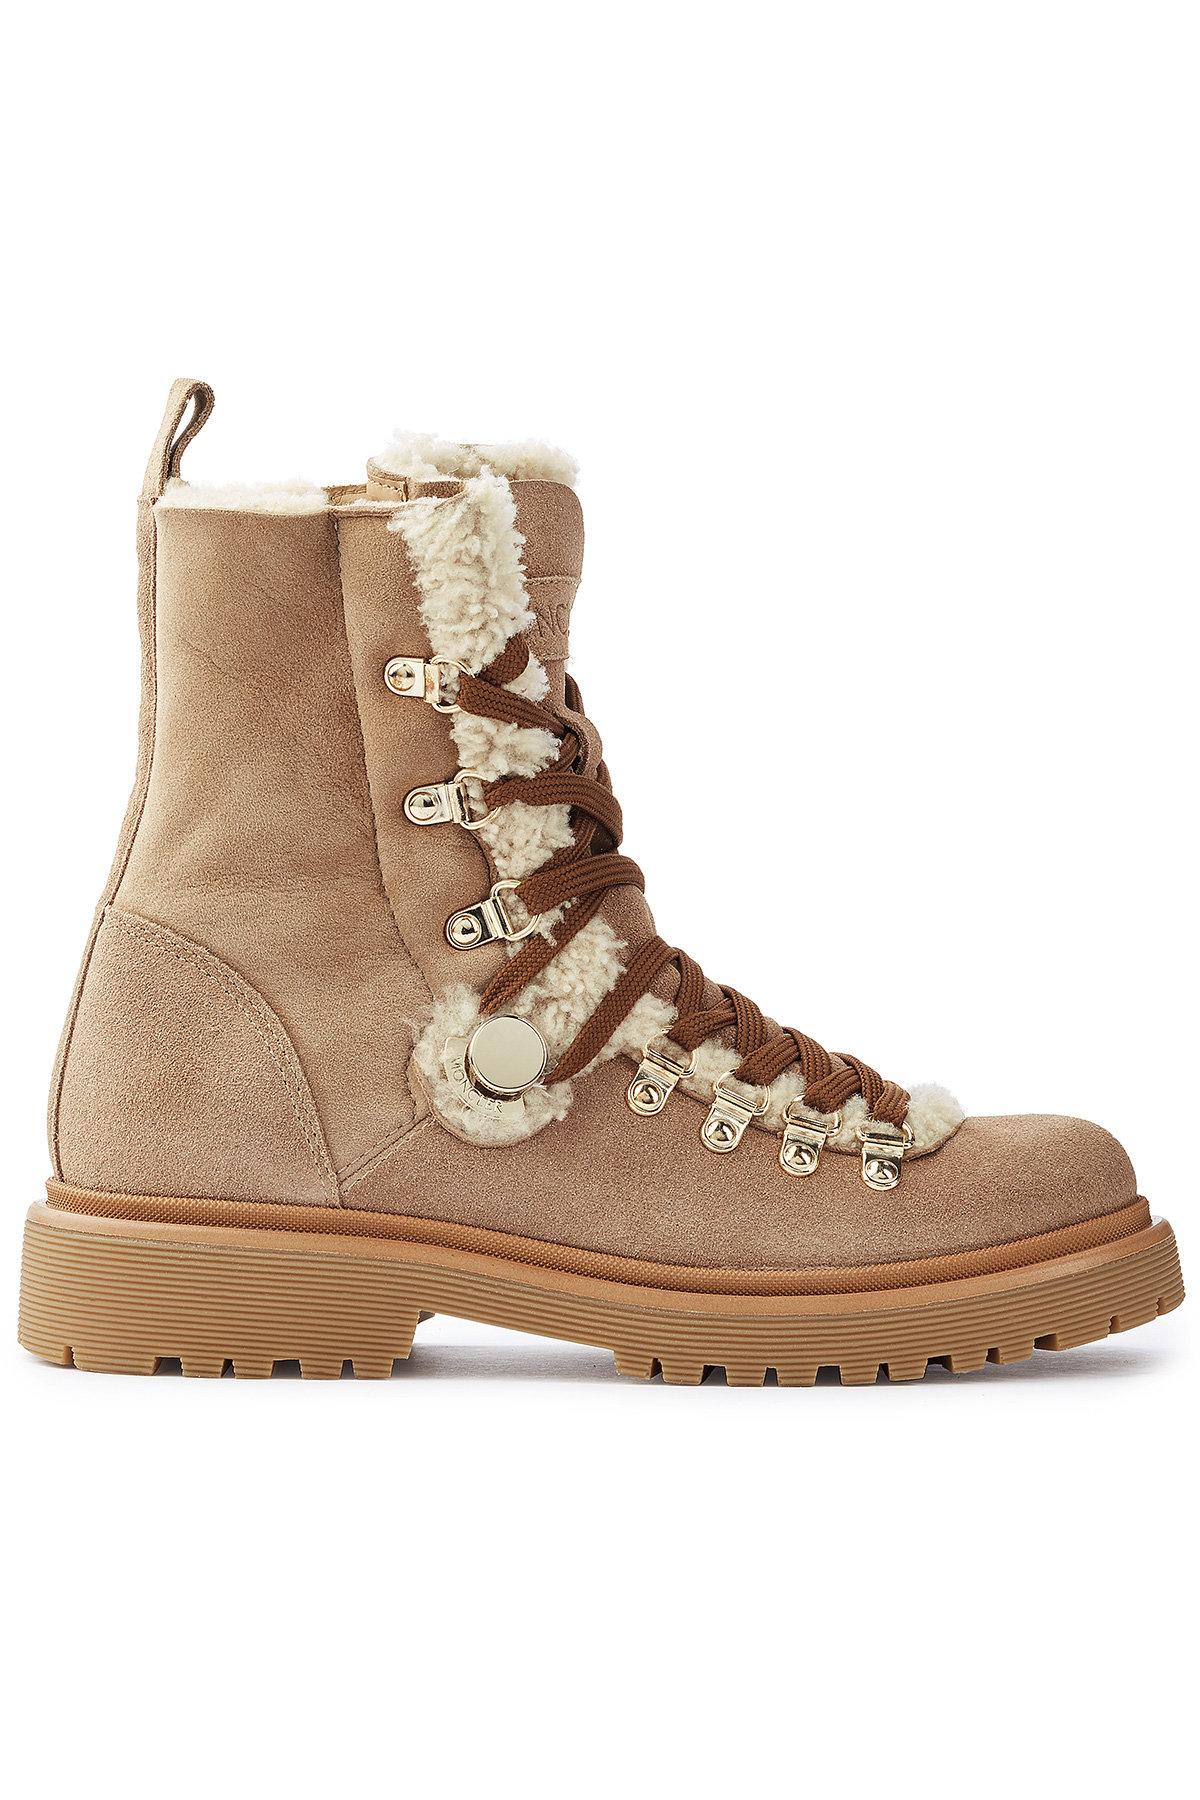 Moncler Berenice Suede Ankle Boots With Shearling in Brown - Lyst